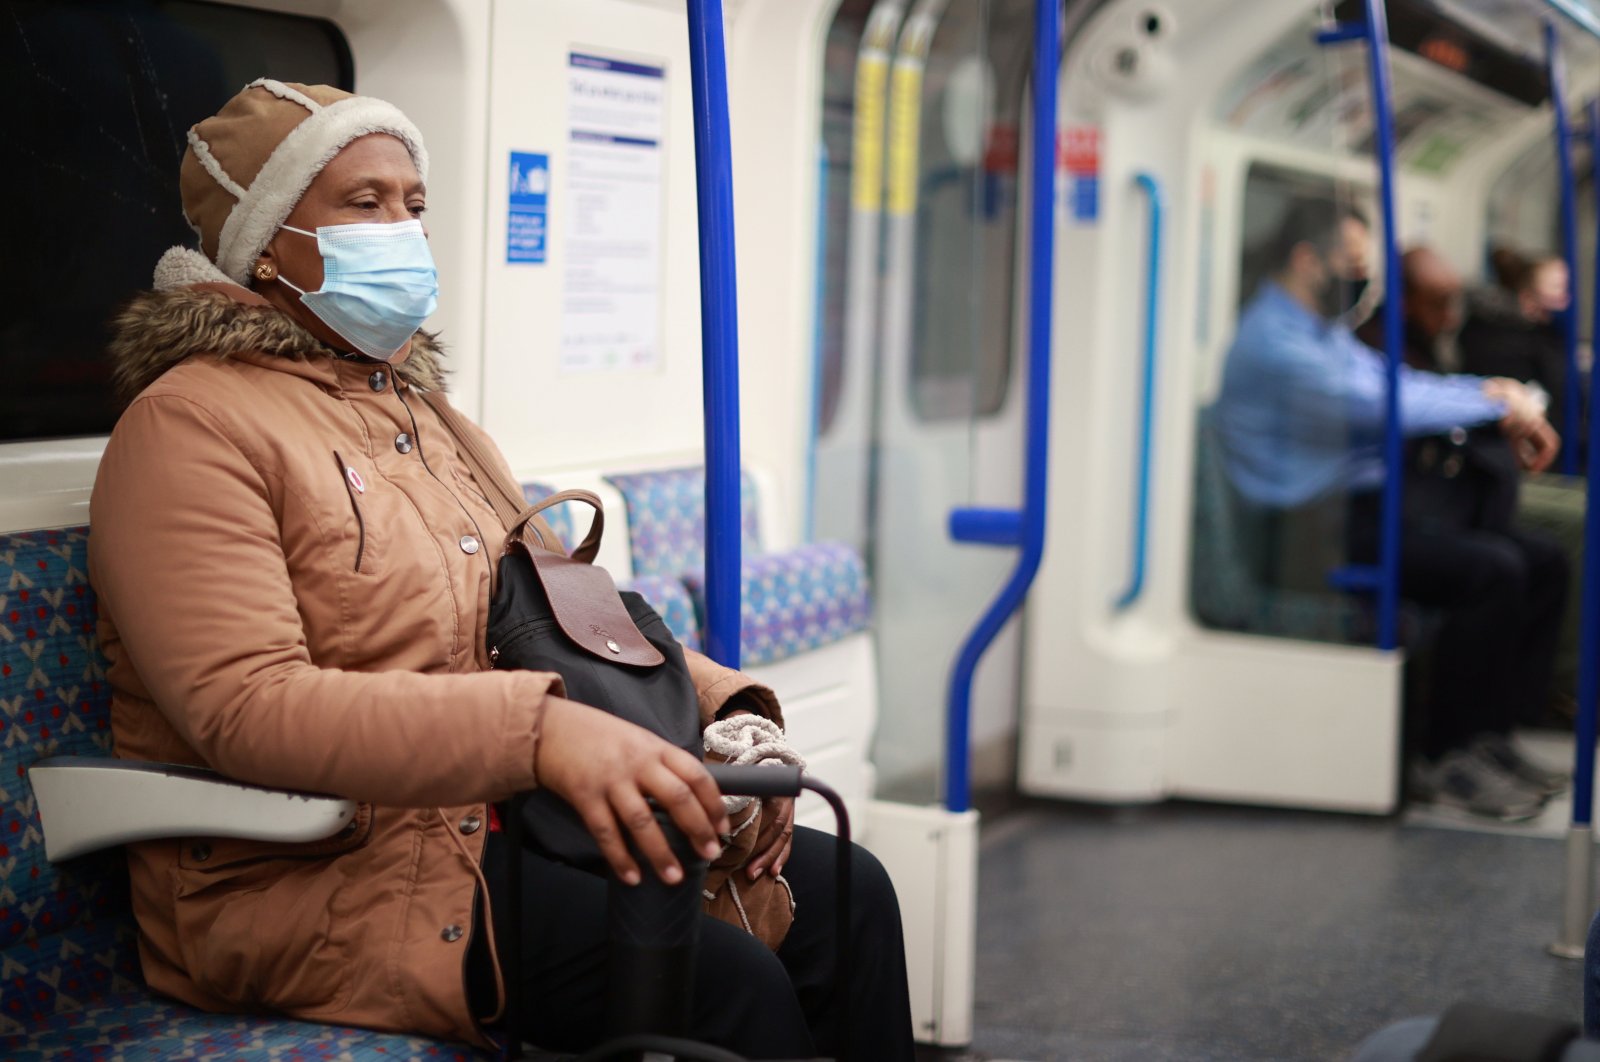 A person wears a face mask on the underground, as the spread of COVID-19 continues in London, U.K., Nov. 30, 2021. (Reuters Photo)